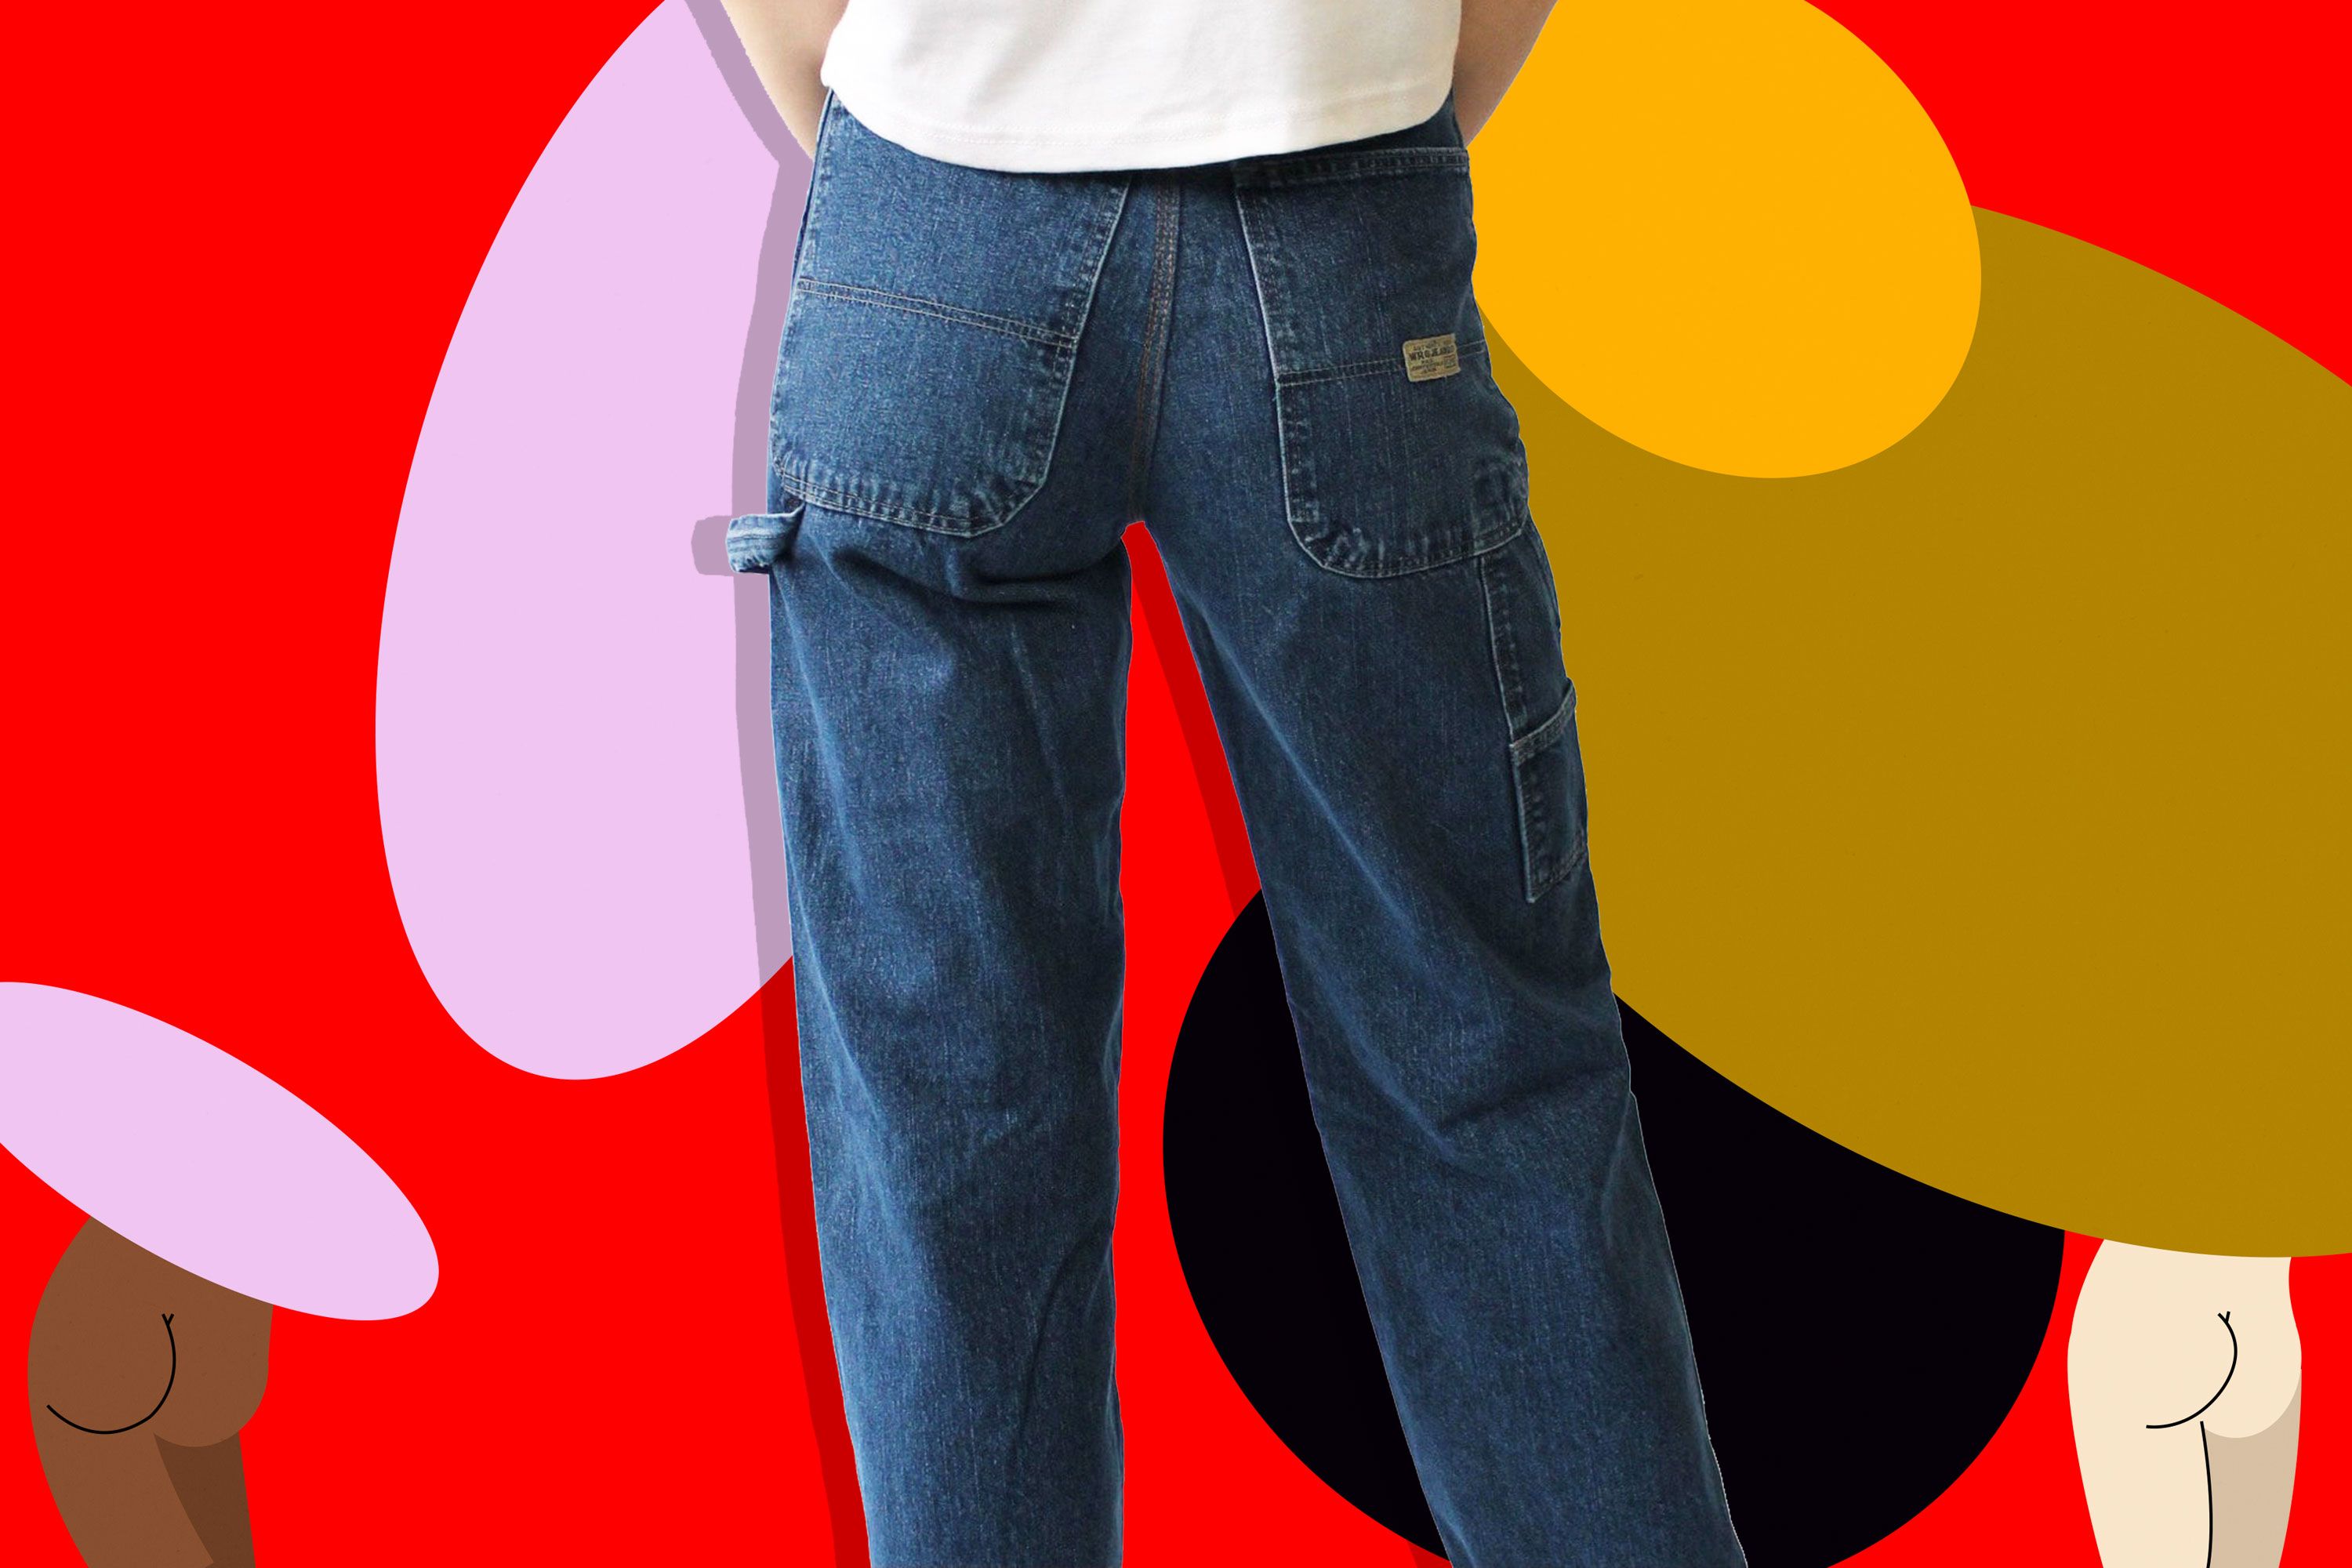 How to Measure Yourself to Buy Vintage Pants | The Strategist